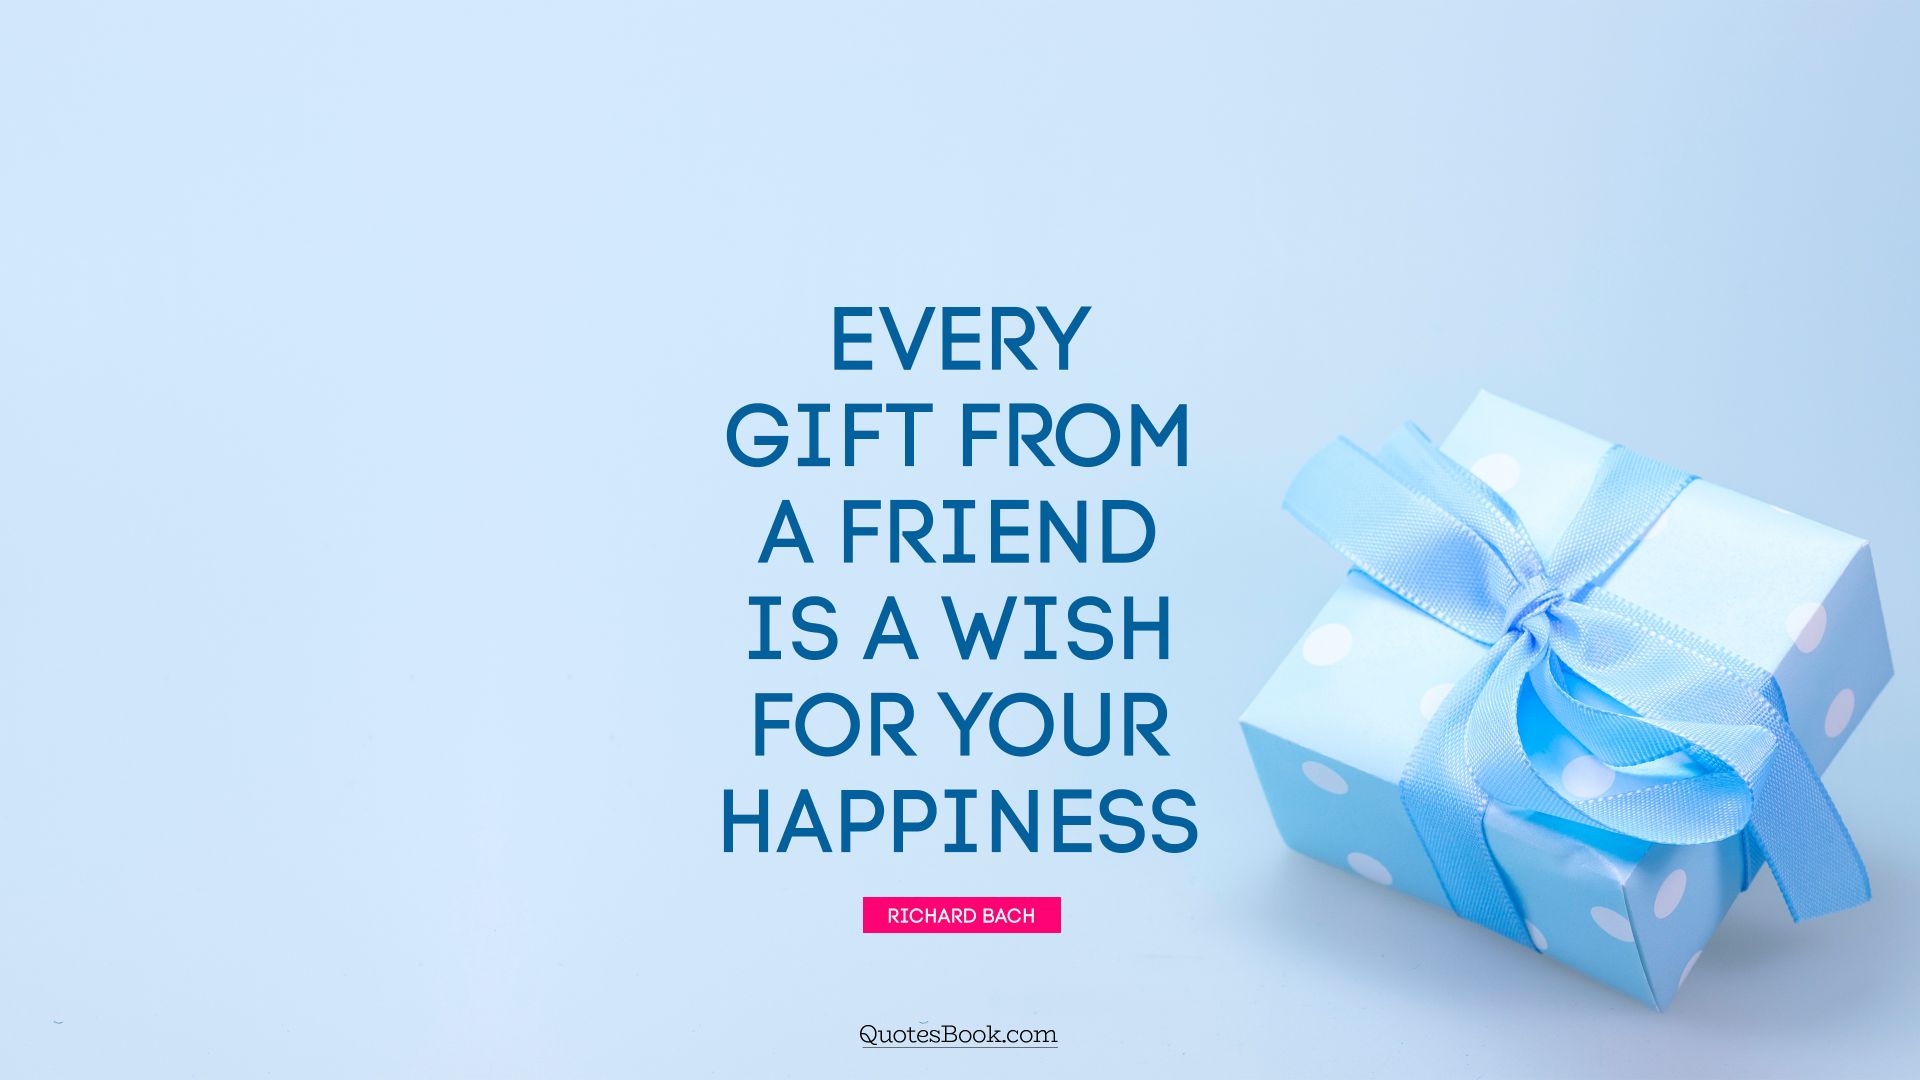 Every gift from a friend is a wish for your happiness. - Quote by Richard Bach